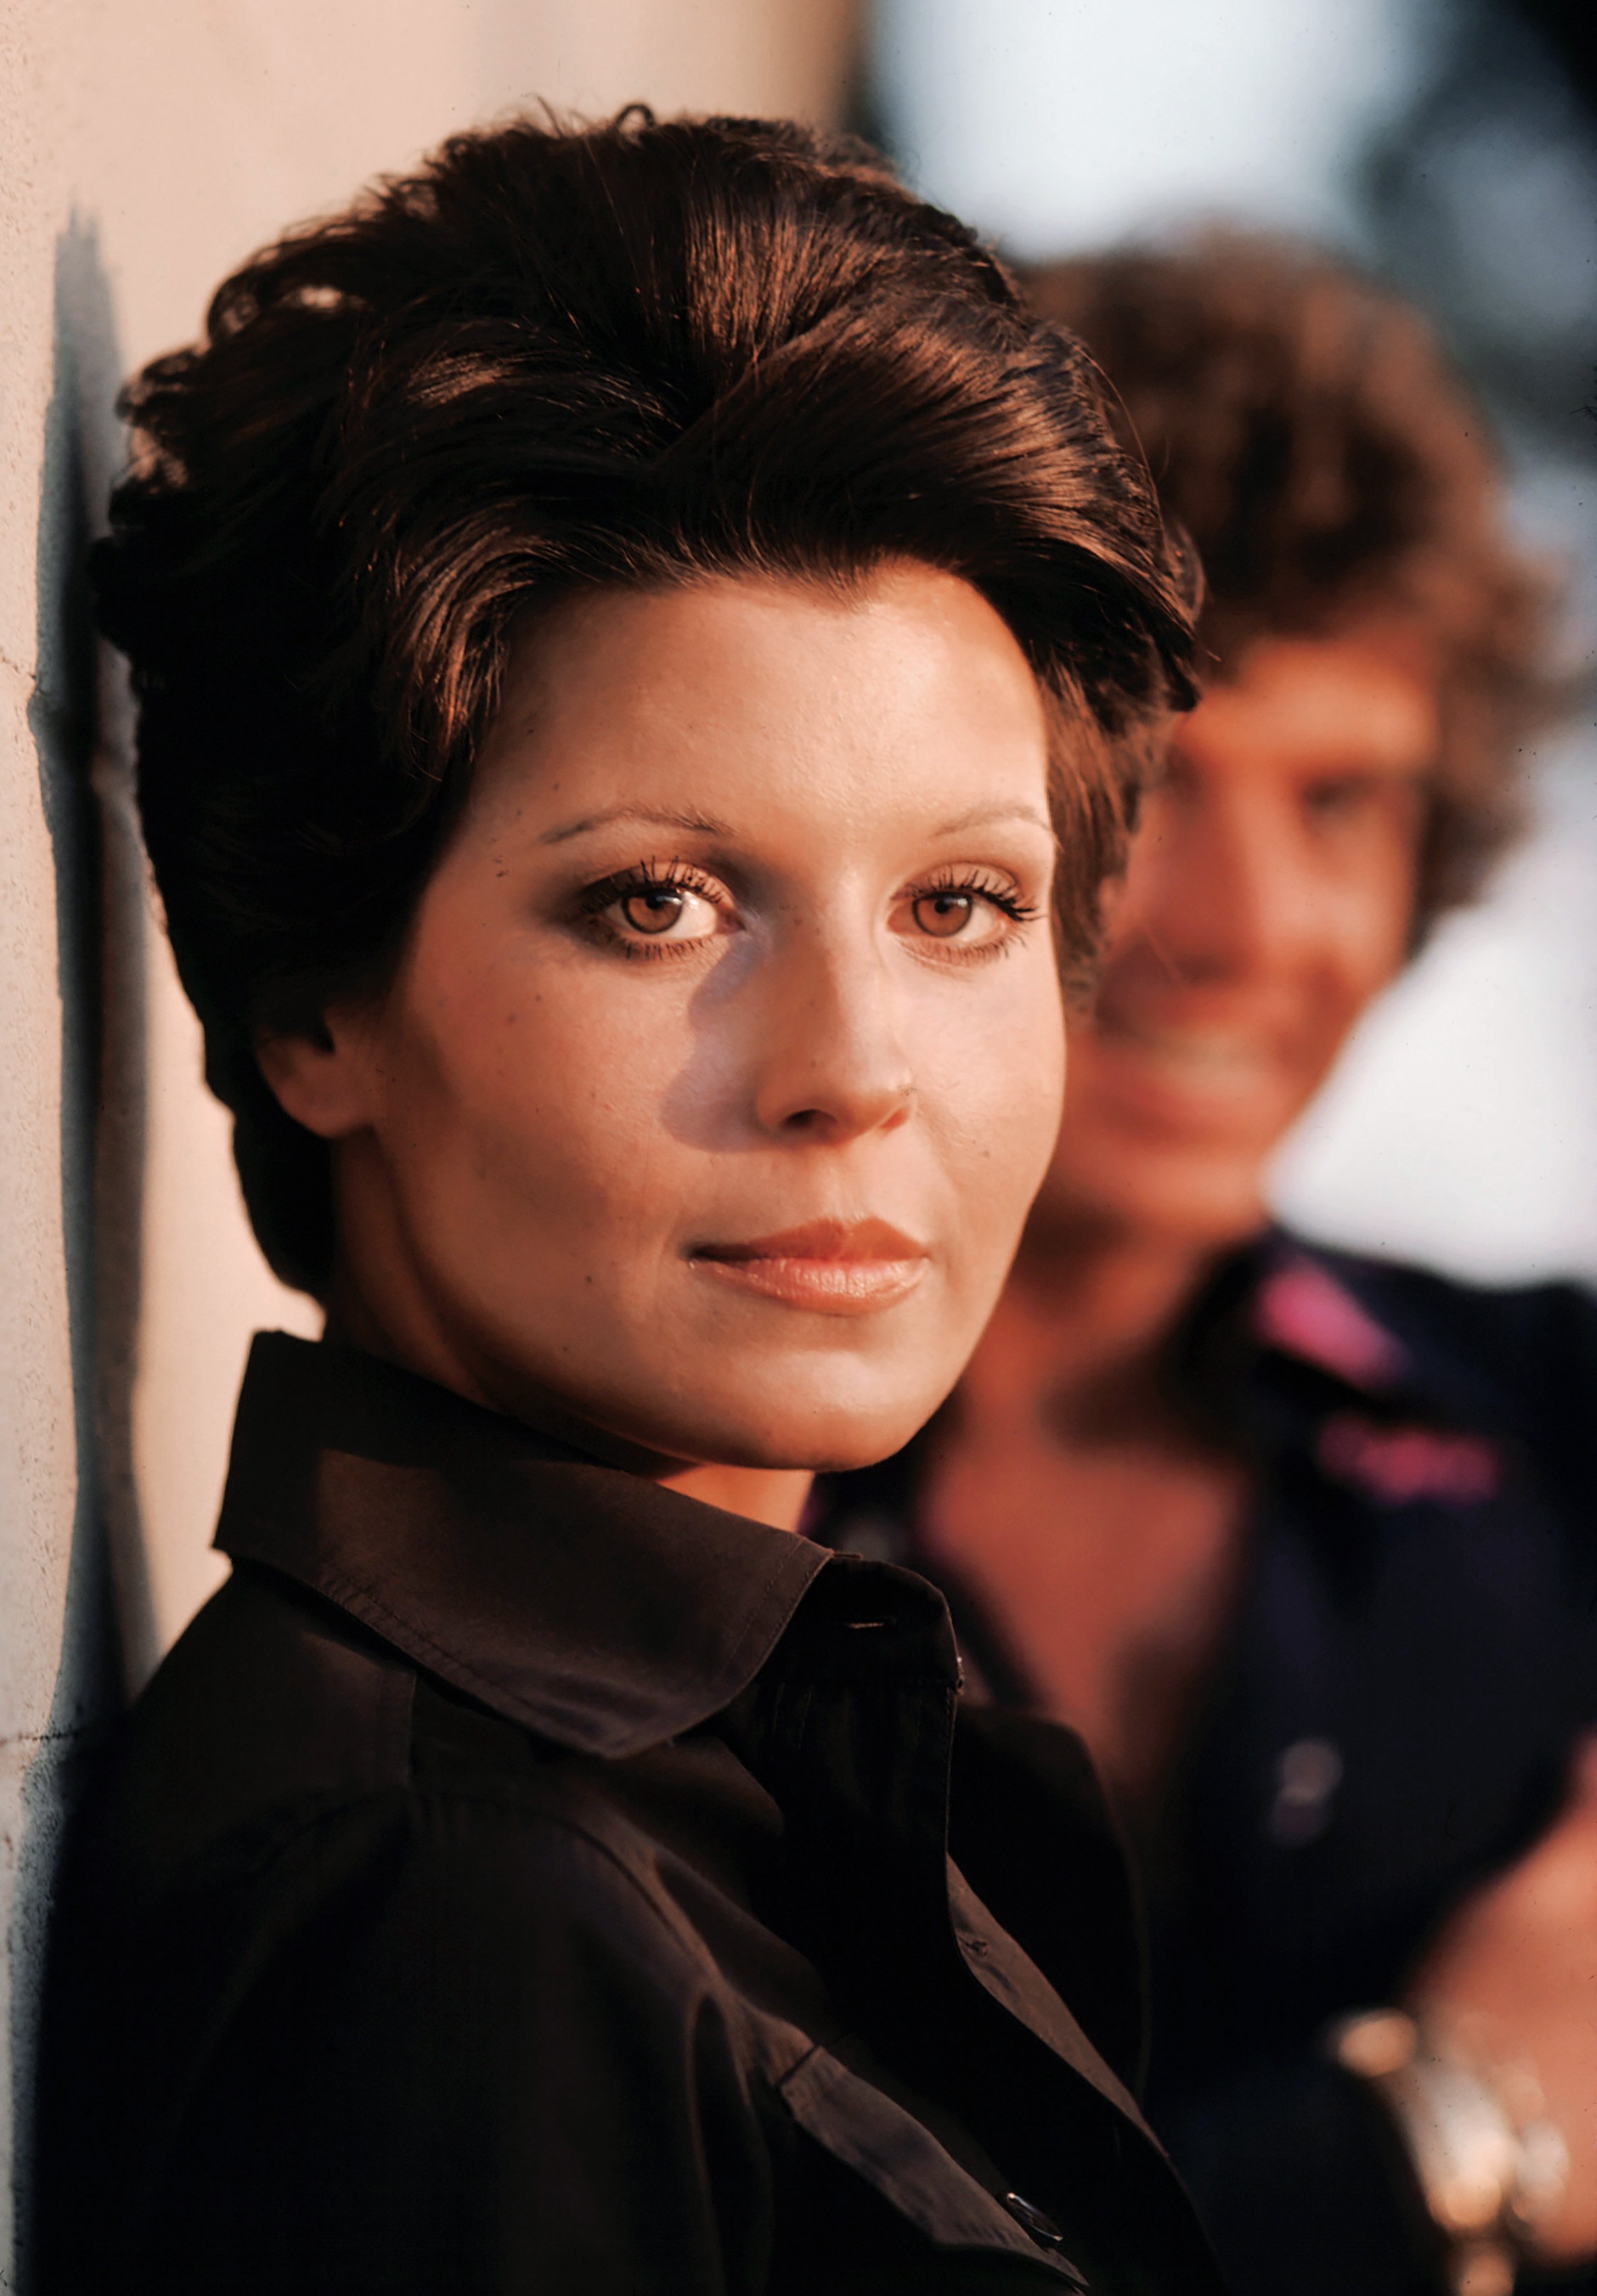 Tina Sinatra poses for a portrait in 1974 in Los Angeles, California | Source: Getty Images